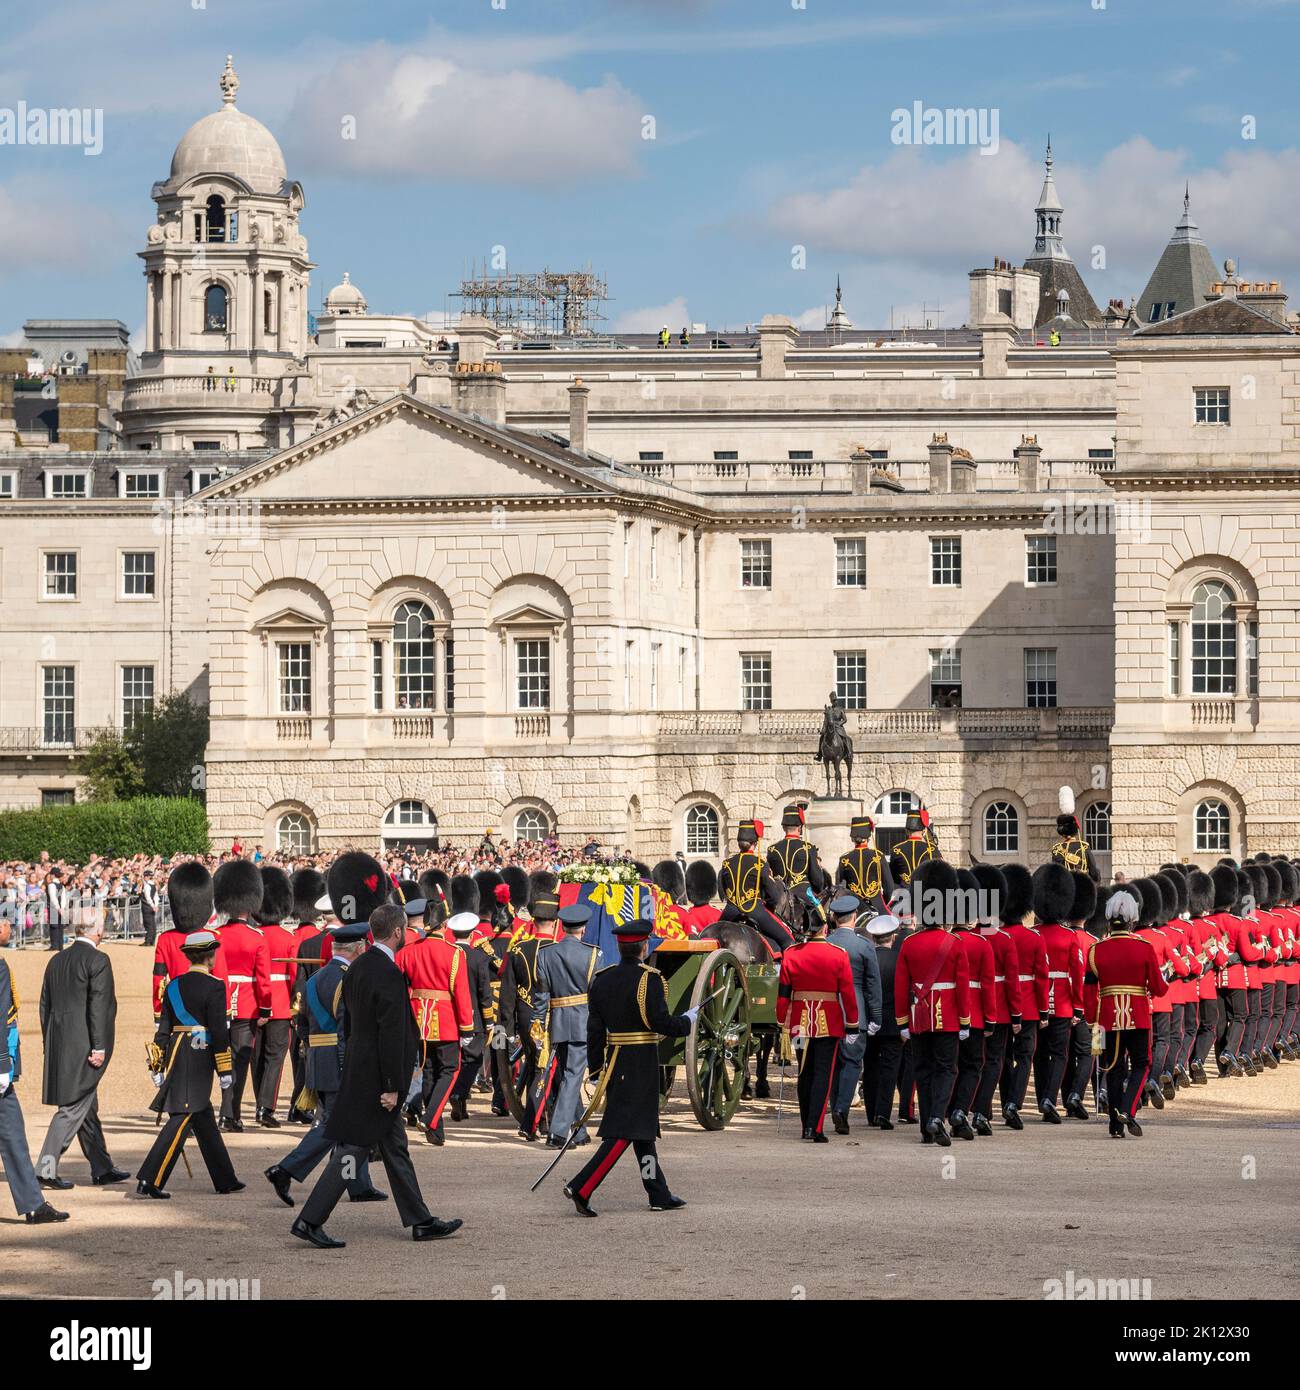 The procession bearing the body of the late Queen Elizabeth II from Buckingham Palace to Westminster Hall for the lying-in-state, seen here crossing Horse Guards Parade. The coffin, covered in the Royal Standard, rests on a gun carriage pulled by a team from the Royal Horse Artillery. The Queen's children, (l-r) Prince Andrew, Princess Anne, and King Charles III, are walking behind the coffin Stock Photo